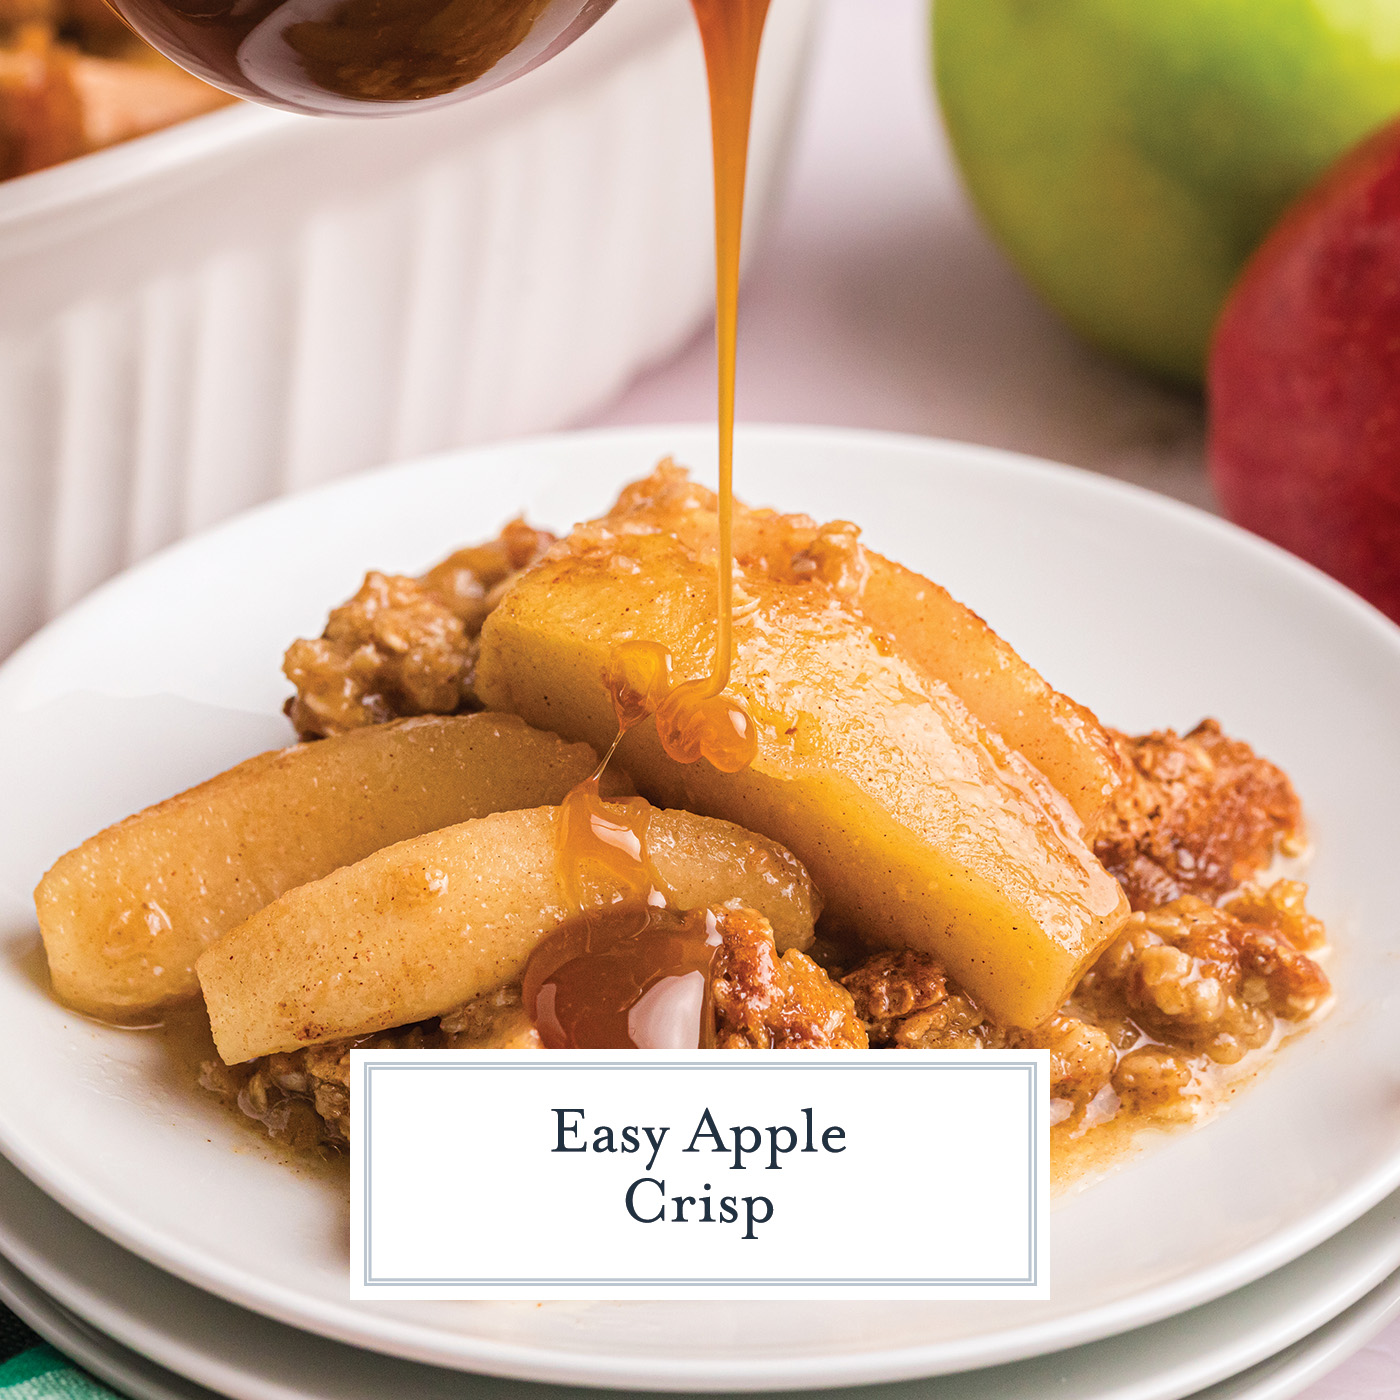 caramel drizzled onto apple crisp with text overlay for facebook